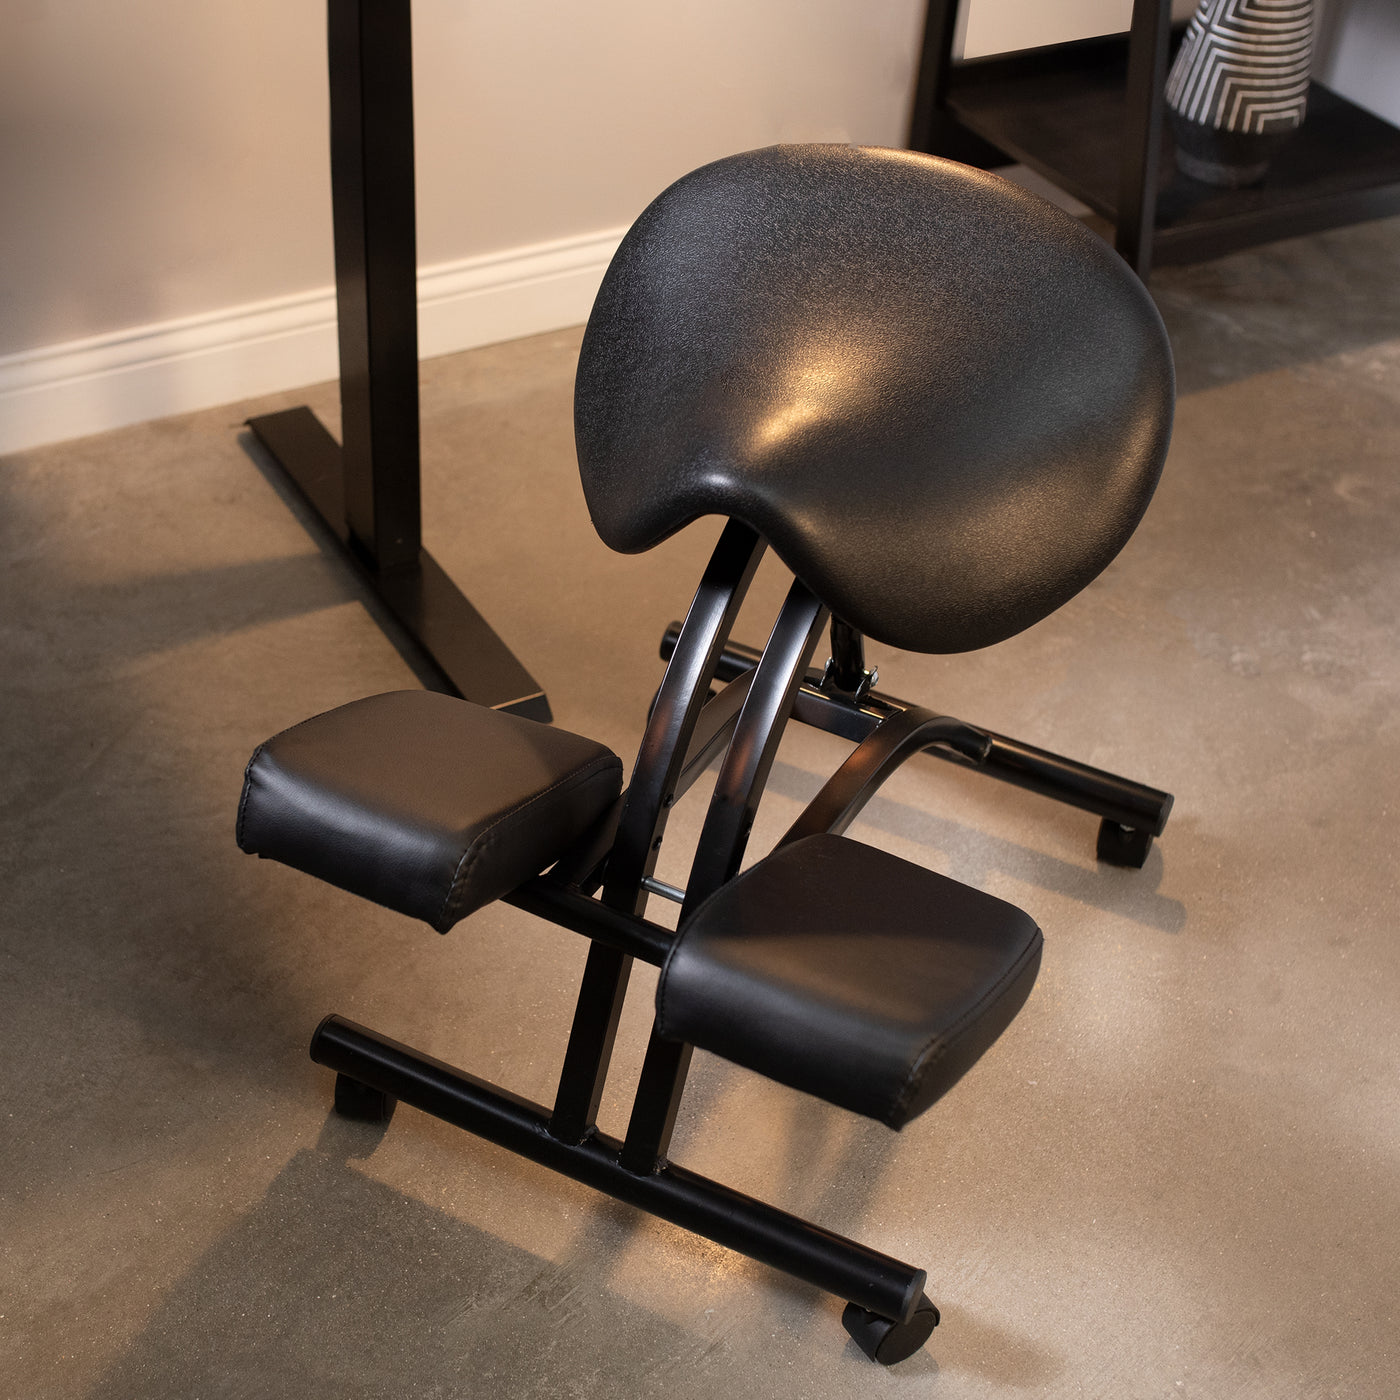 Sturdy saddle seat kneeling chair for tension relief and posture.